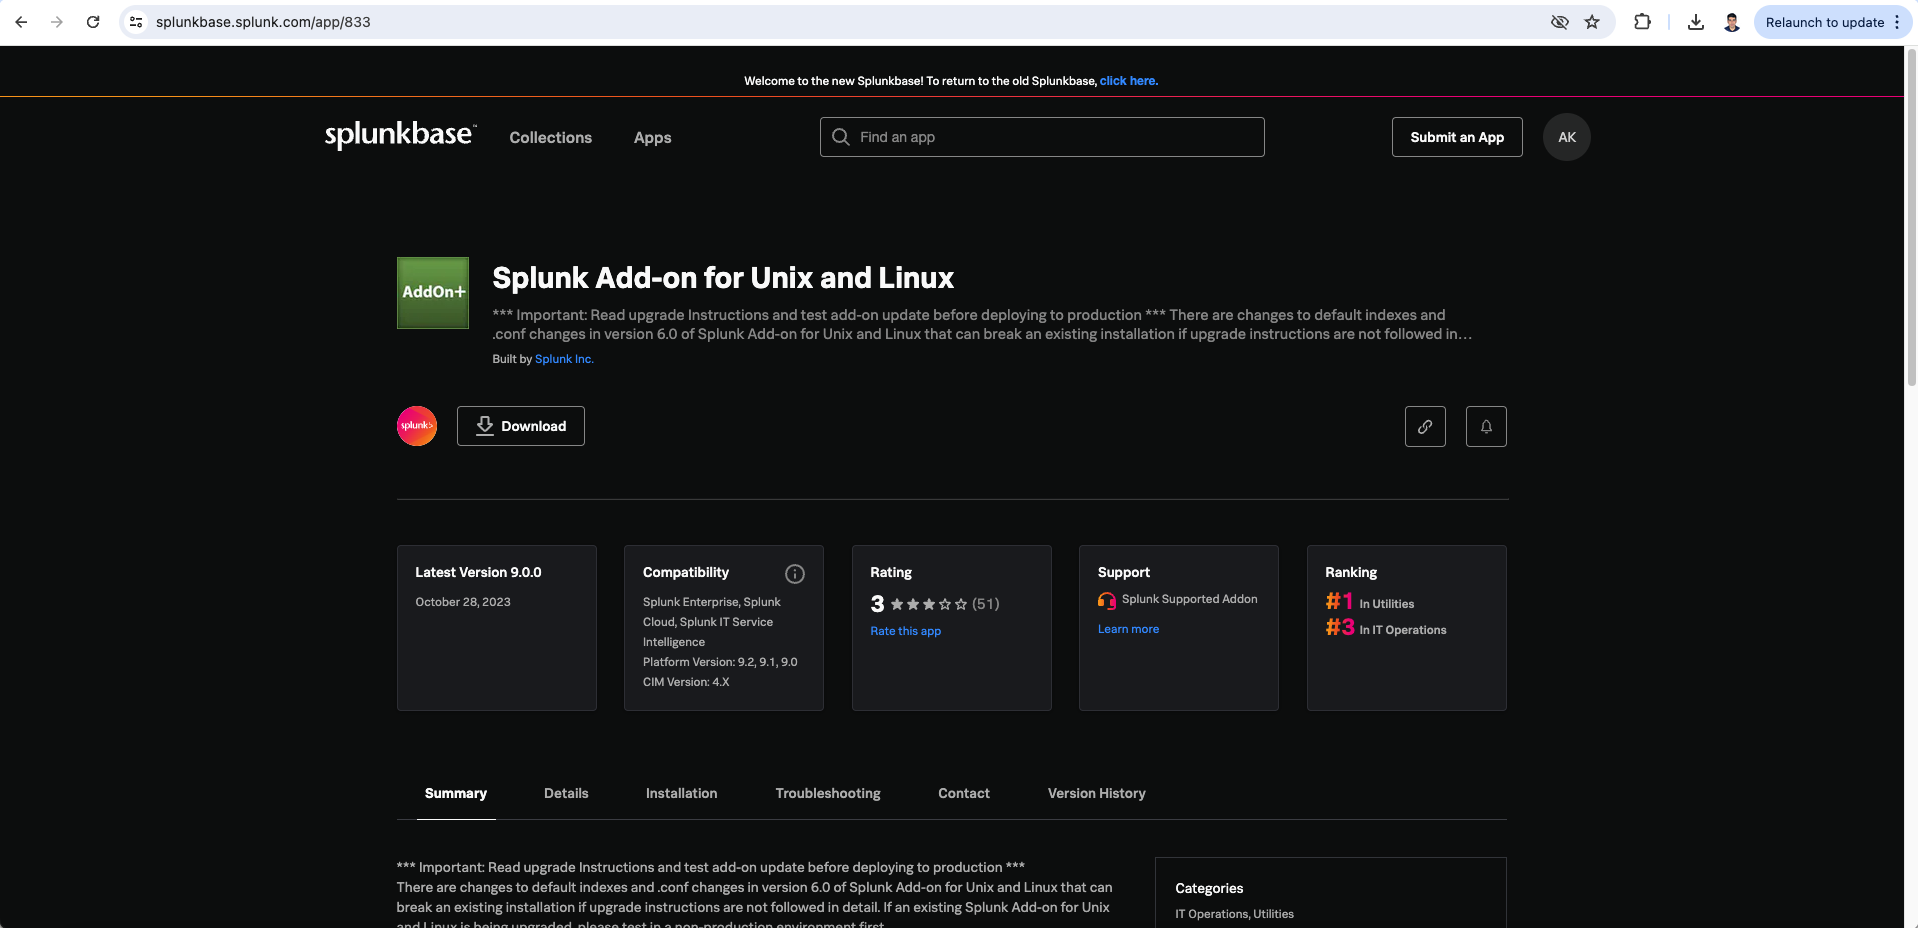 Splunkbase product page for the Splunk Add-on for Unix and Linux, featuring download options and add-on details.